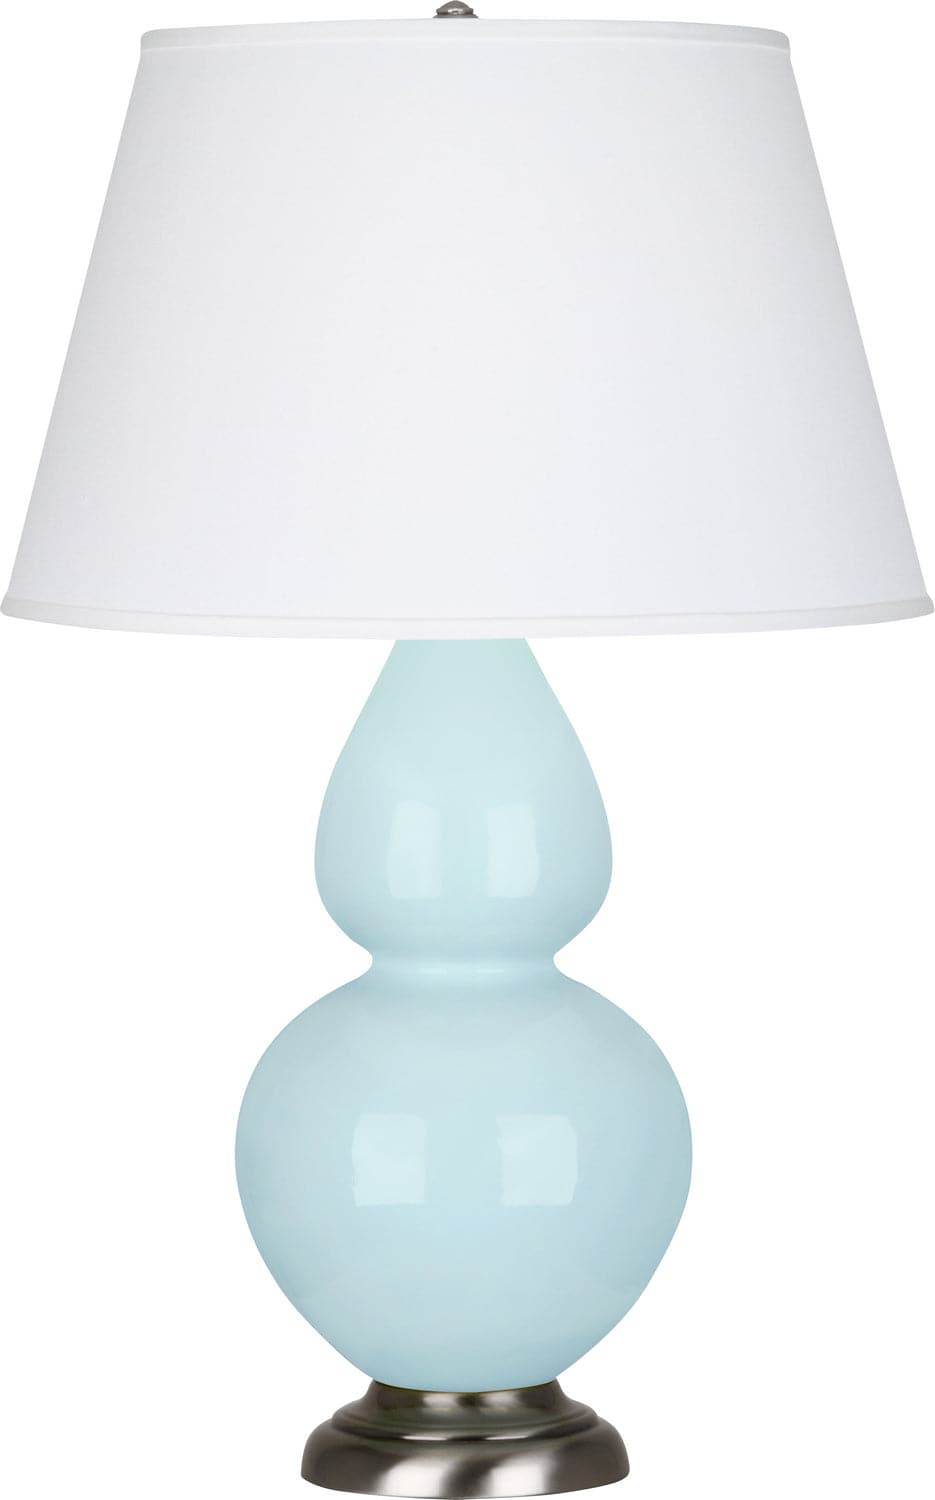 Robert Abbey - 1676X - One Light Table Lamp - Double Gourd - Baby Blue Glazed w/Antique Silver